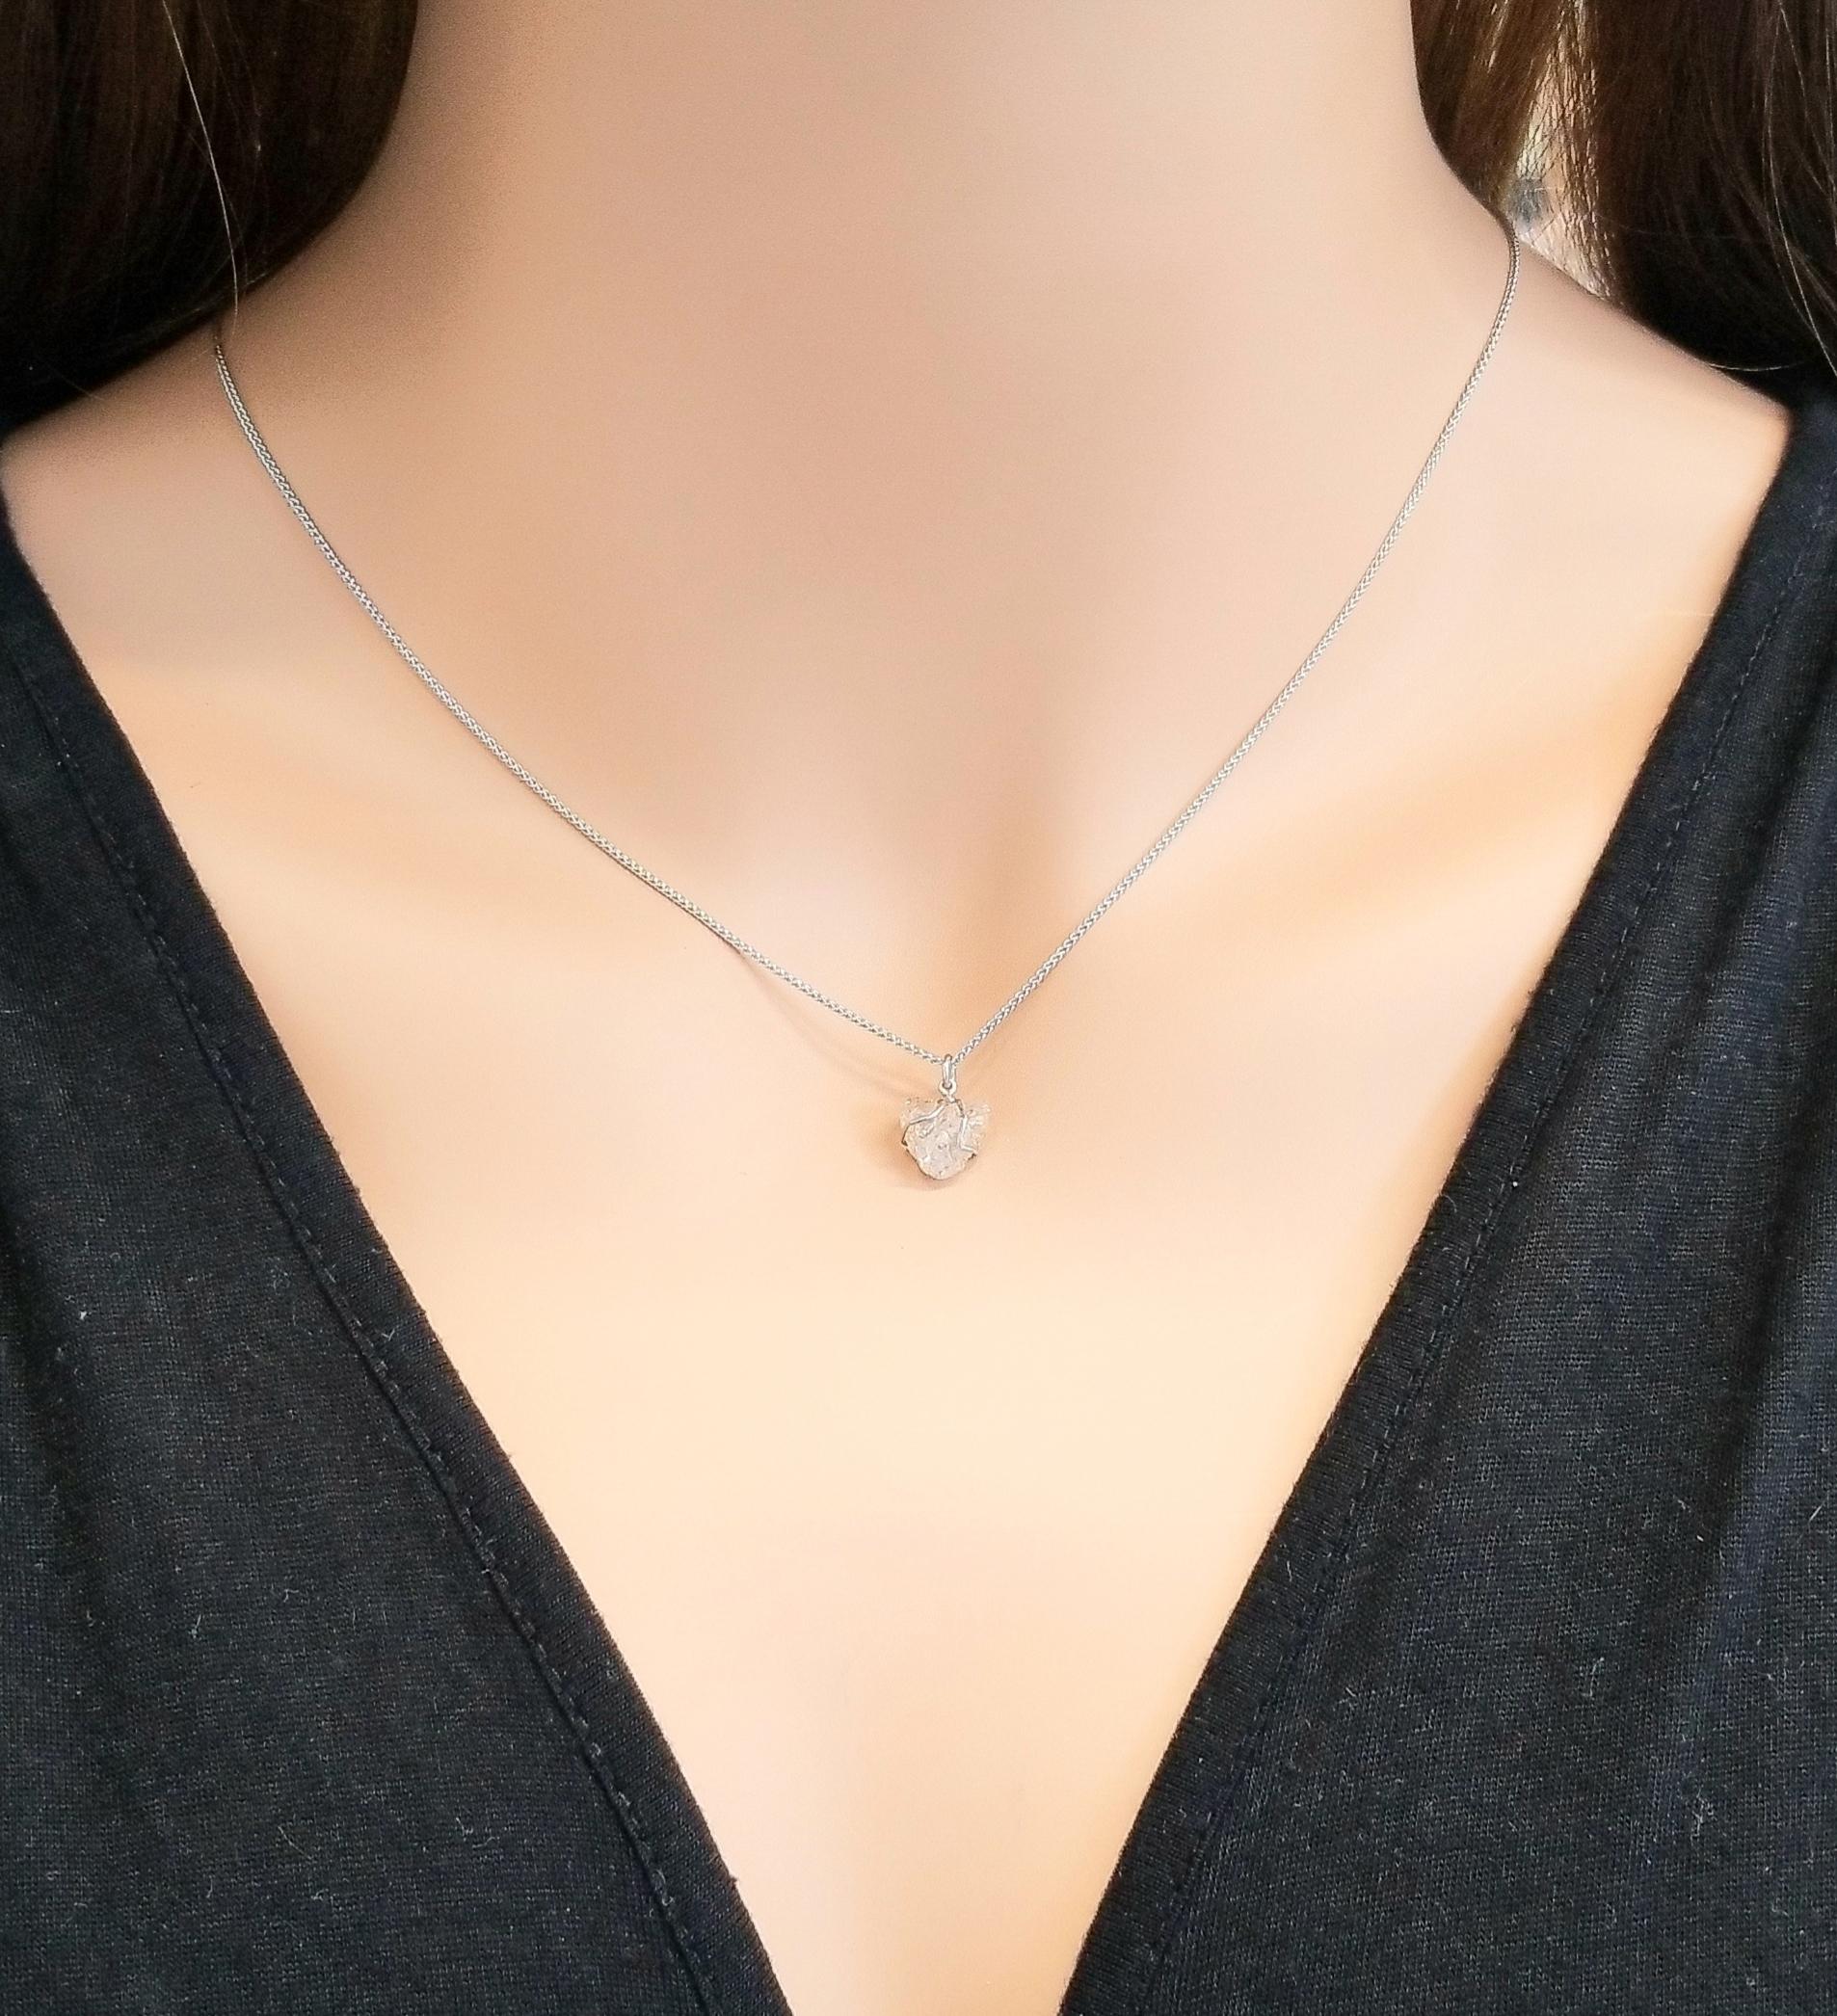 This contemporary diamond solitaire pendant necklace is finely crafted in brightly polished 14 karat white gold and features a stunning 3.28 carat rough diamond beautifully set on a slim bail. This solitaire diamond displays natural growth patterns